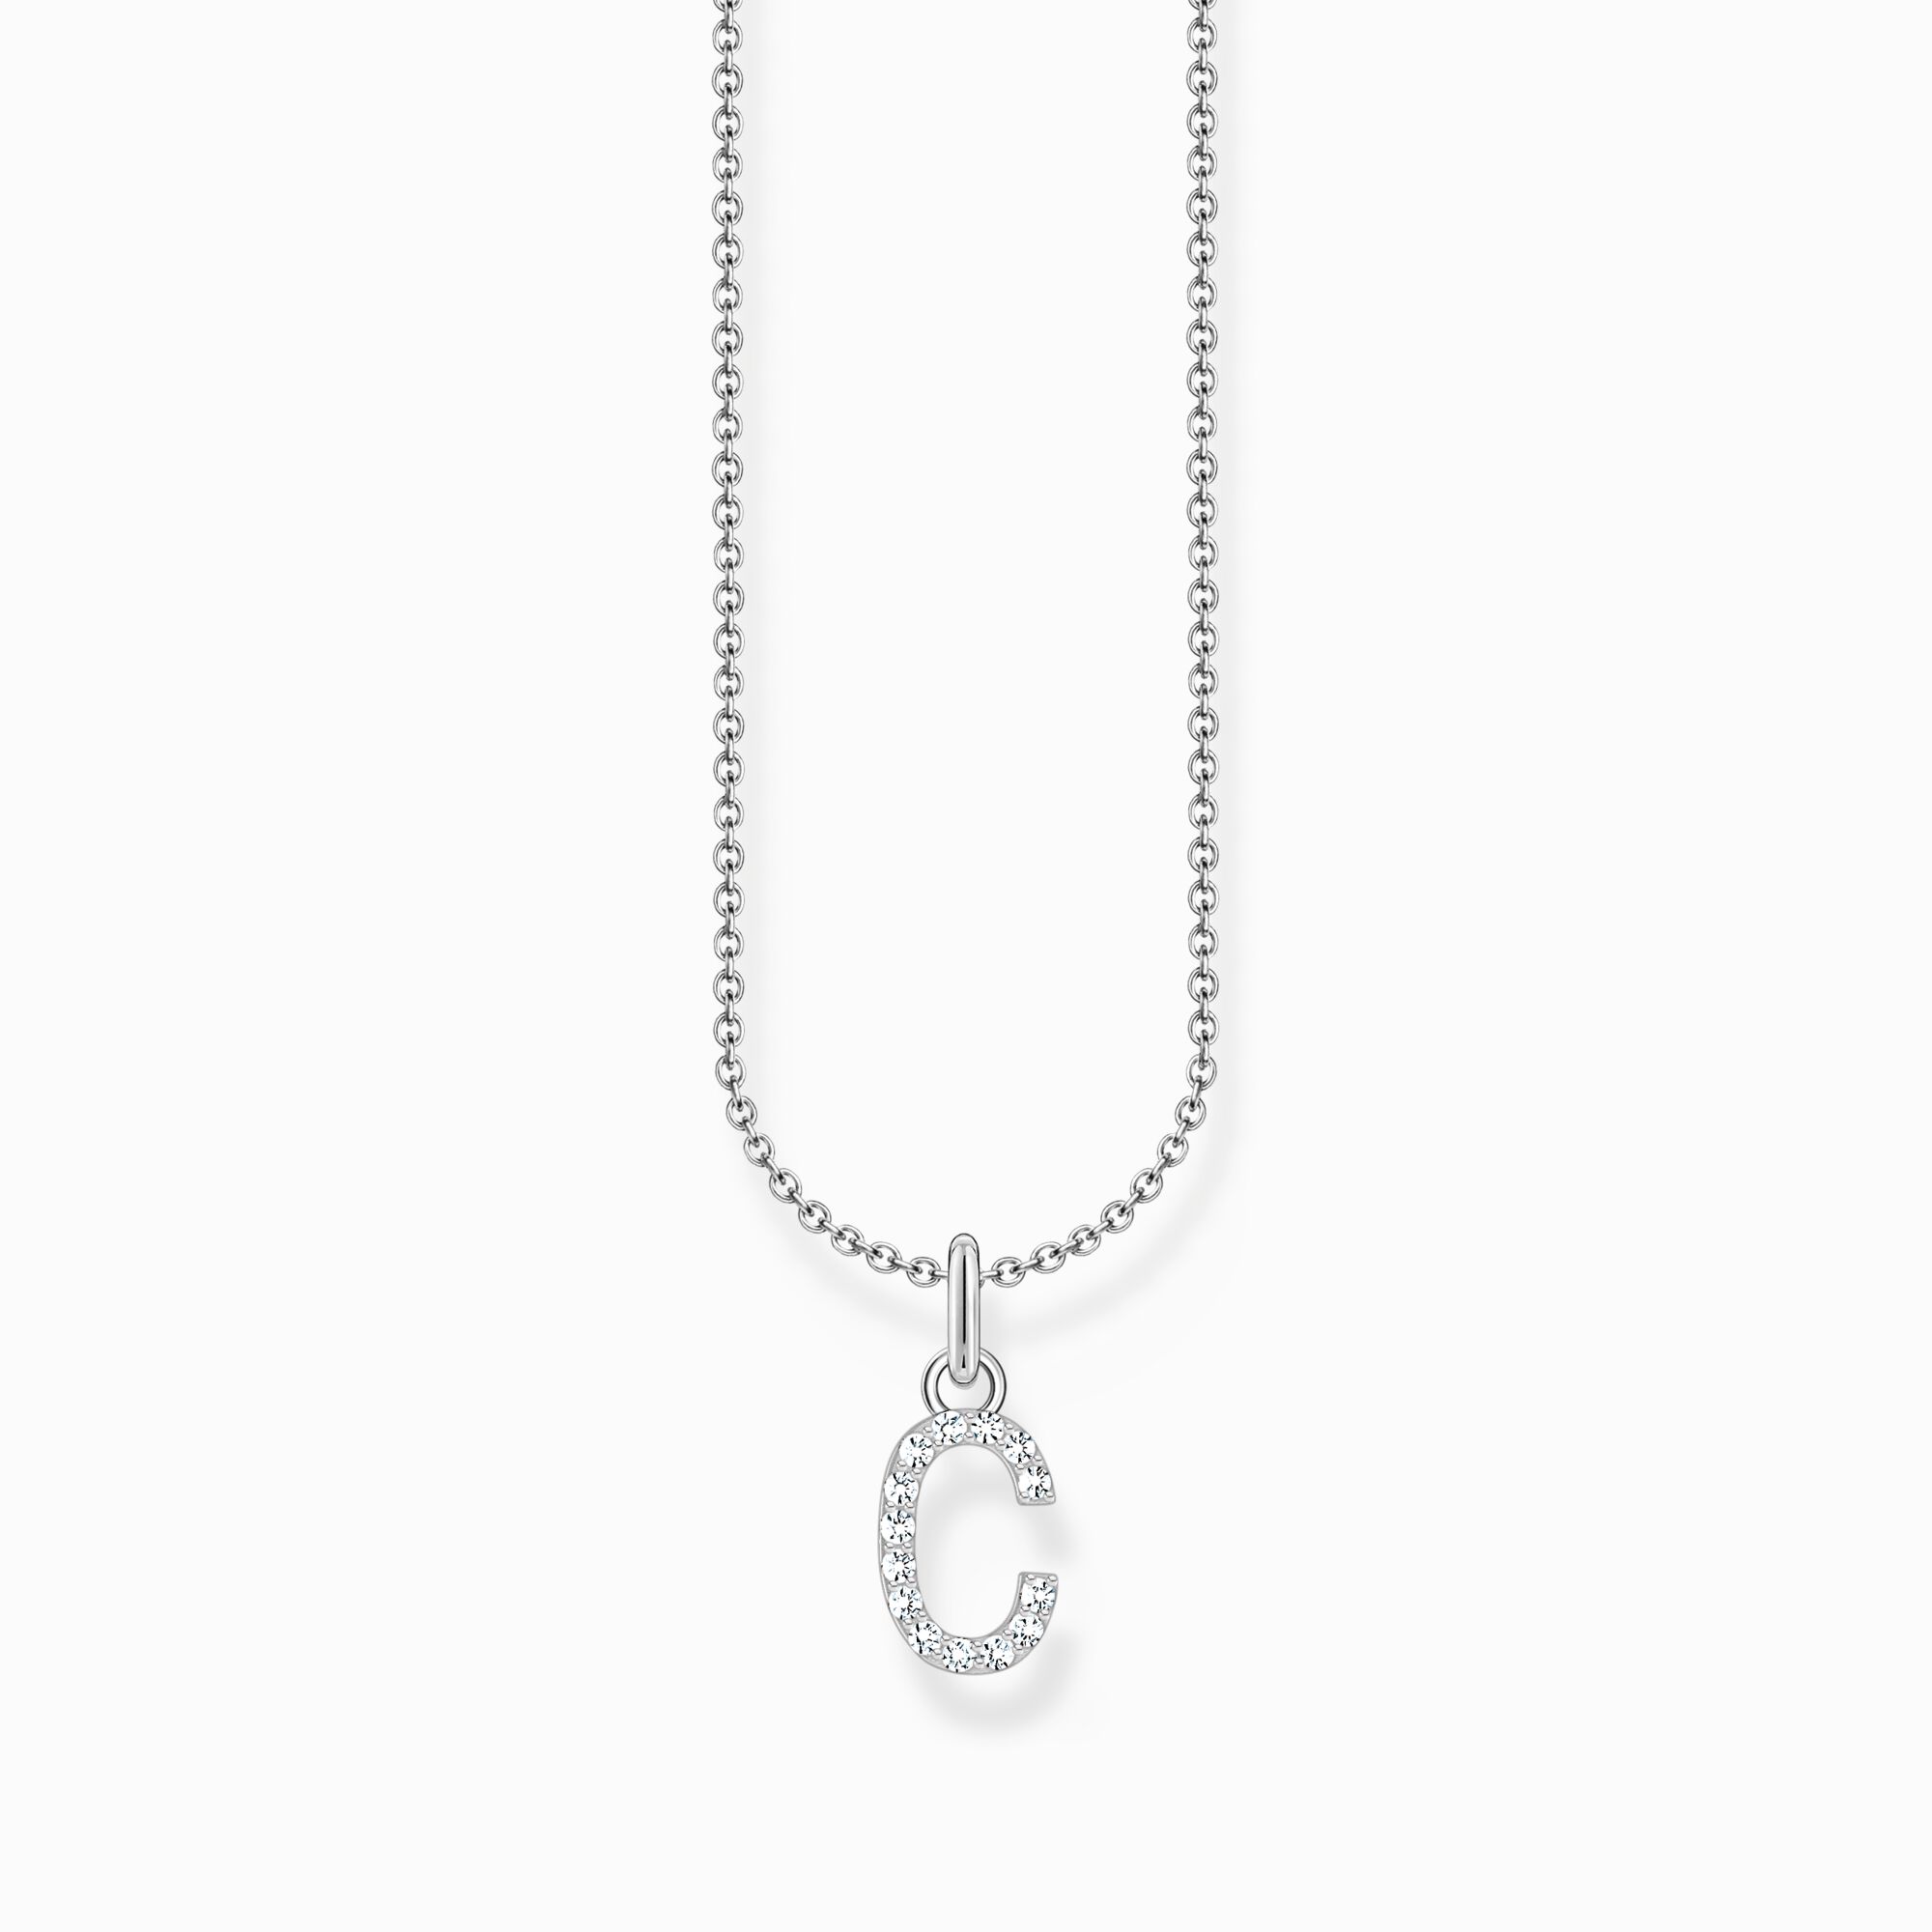 Silver necklace with letter pendant C and white zirconia from the Charming Collection collection in the THOMAS SABO online store